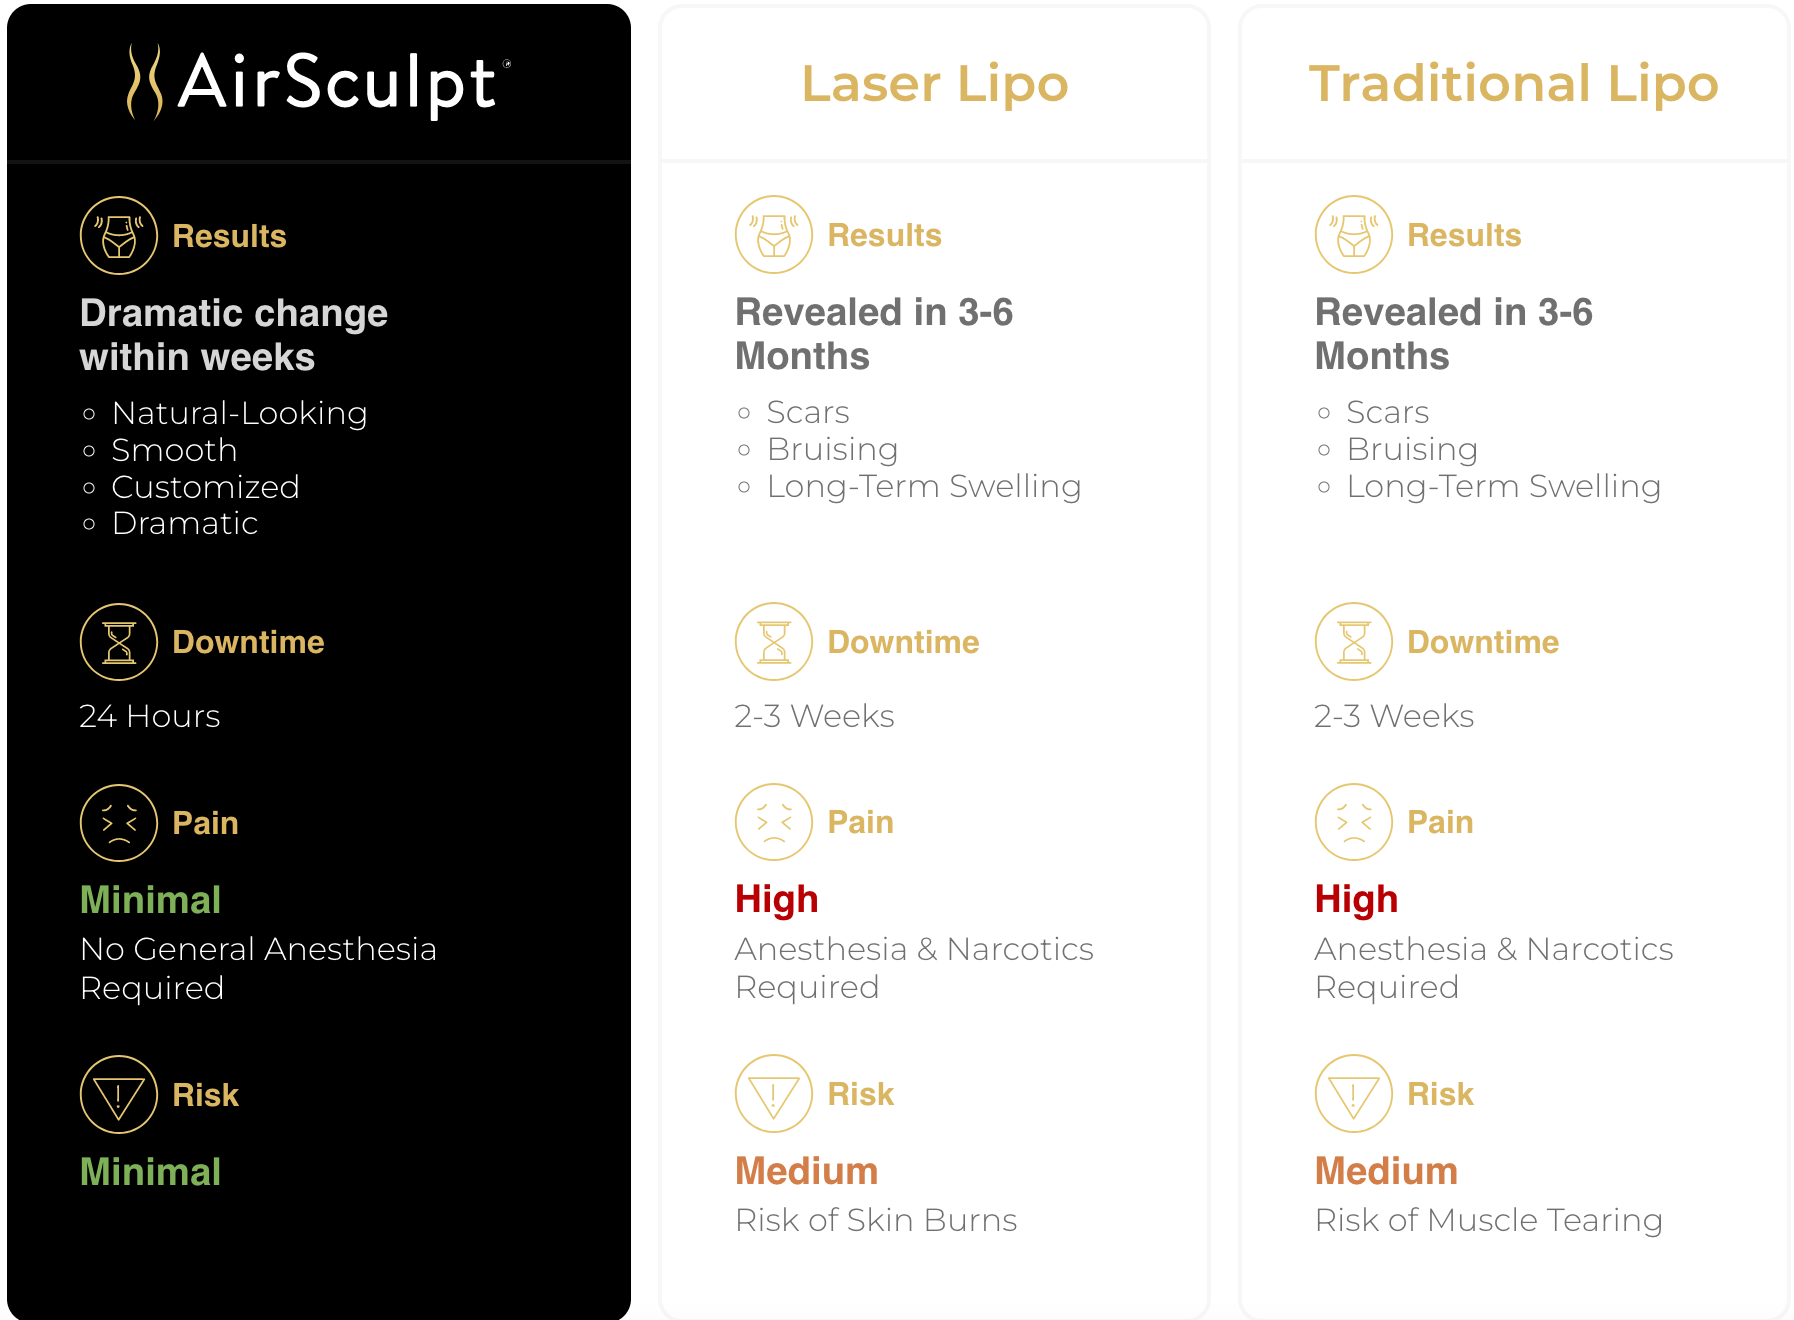 comparison chart of airsculpt vs traditional and laser lipo